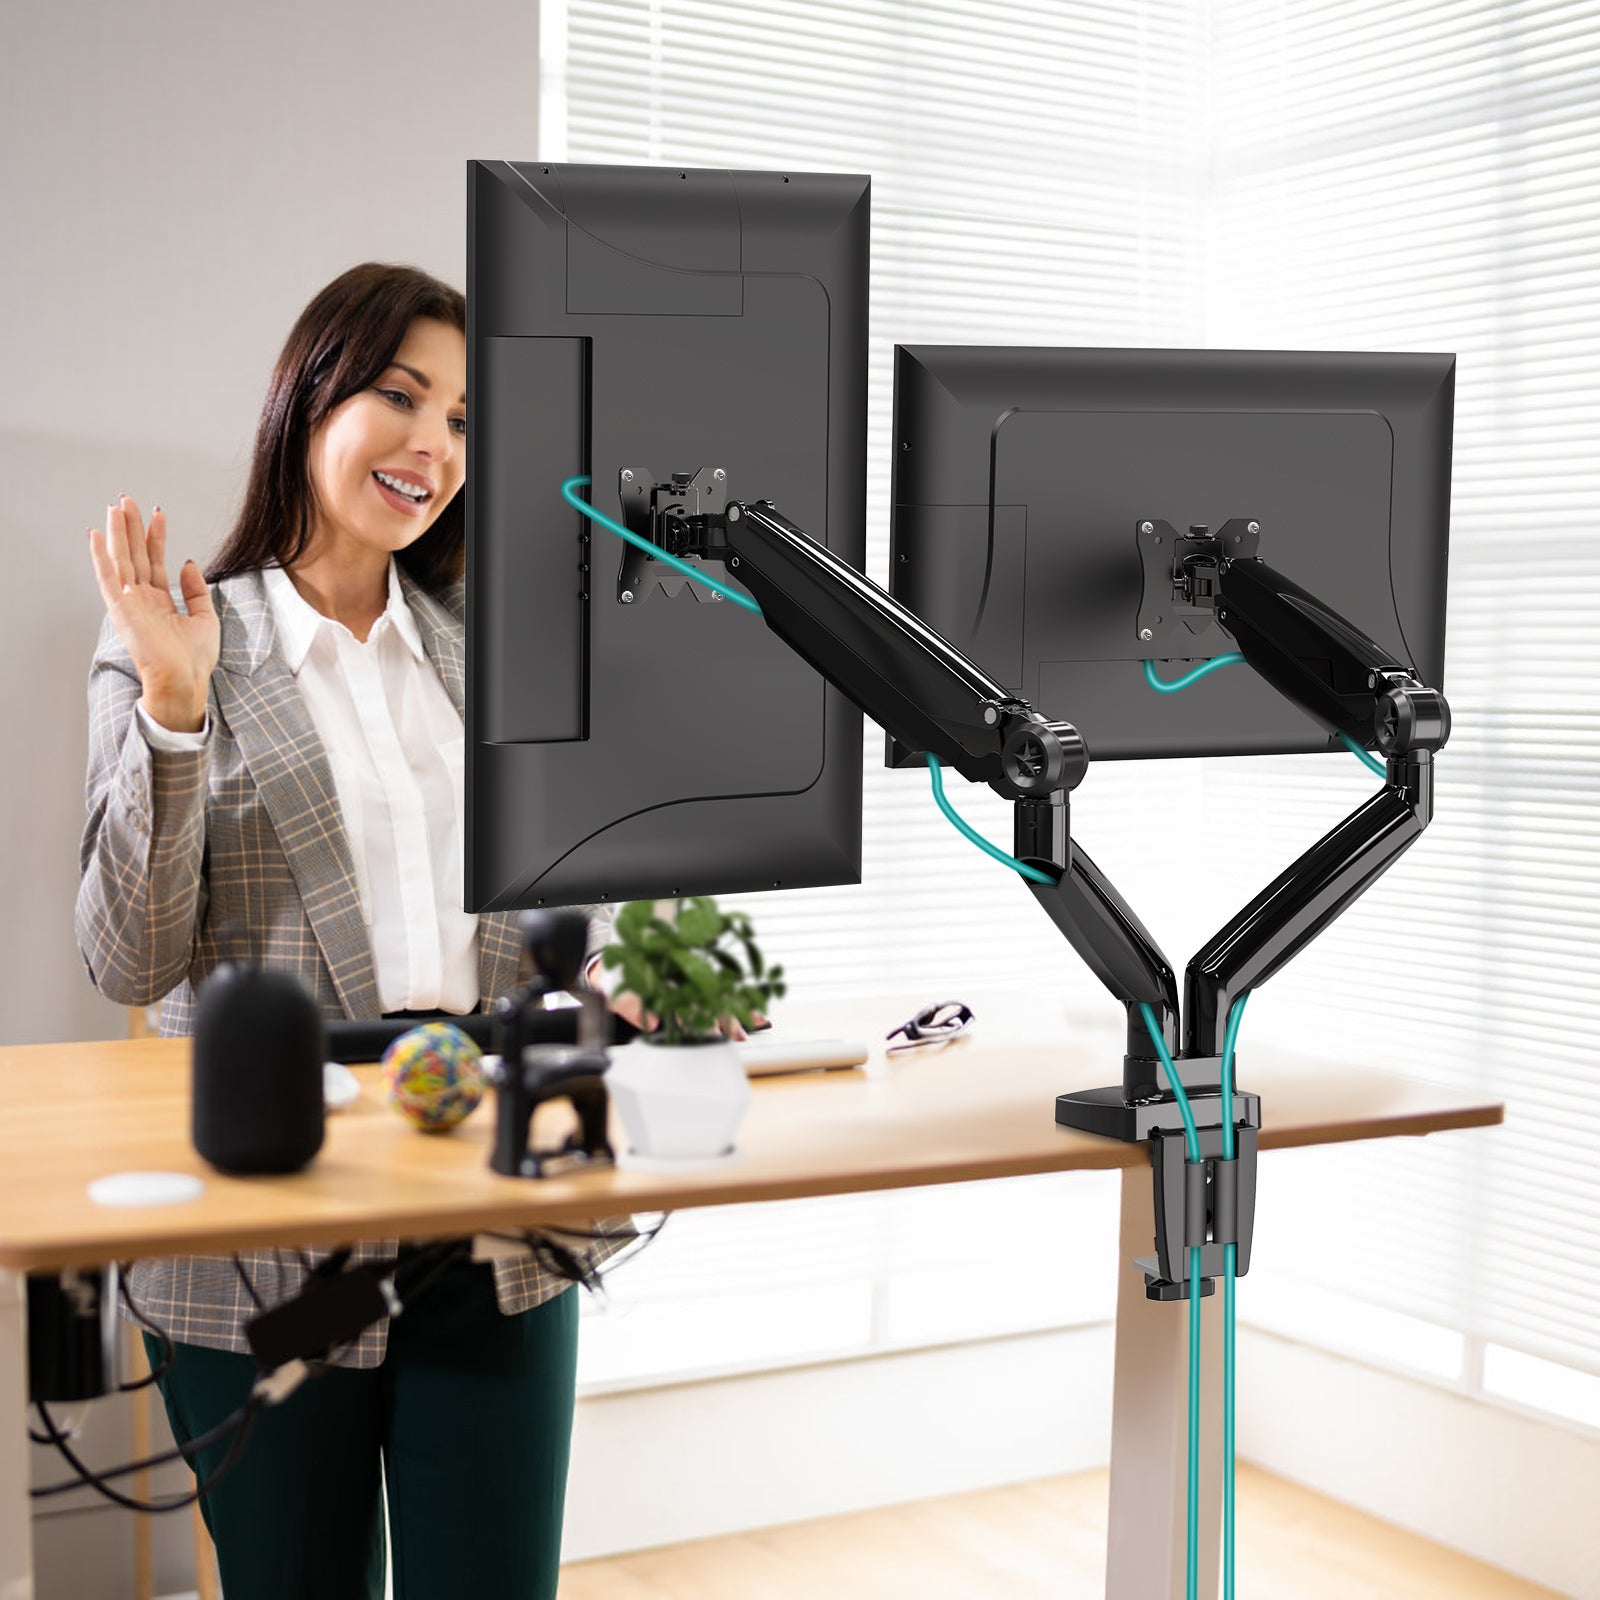 MOUNTUP UltraWide Dual Monitor Arm for Max 35 inch Screen, Support Up to 26.4lbs Heavy Duty Monitor Desk Mount, Black(MU7002)